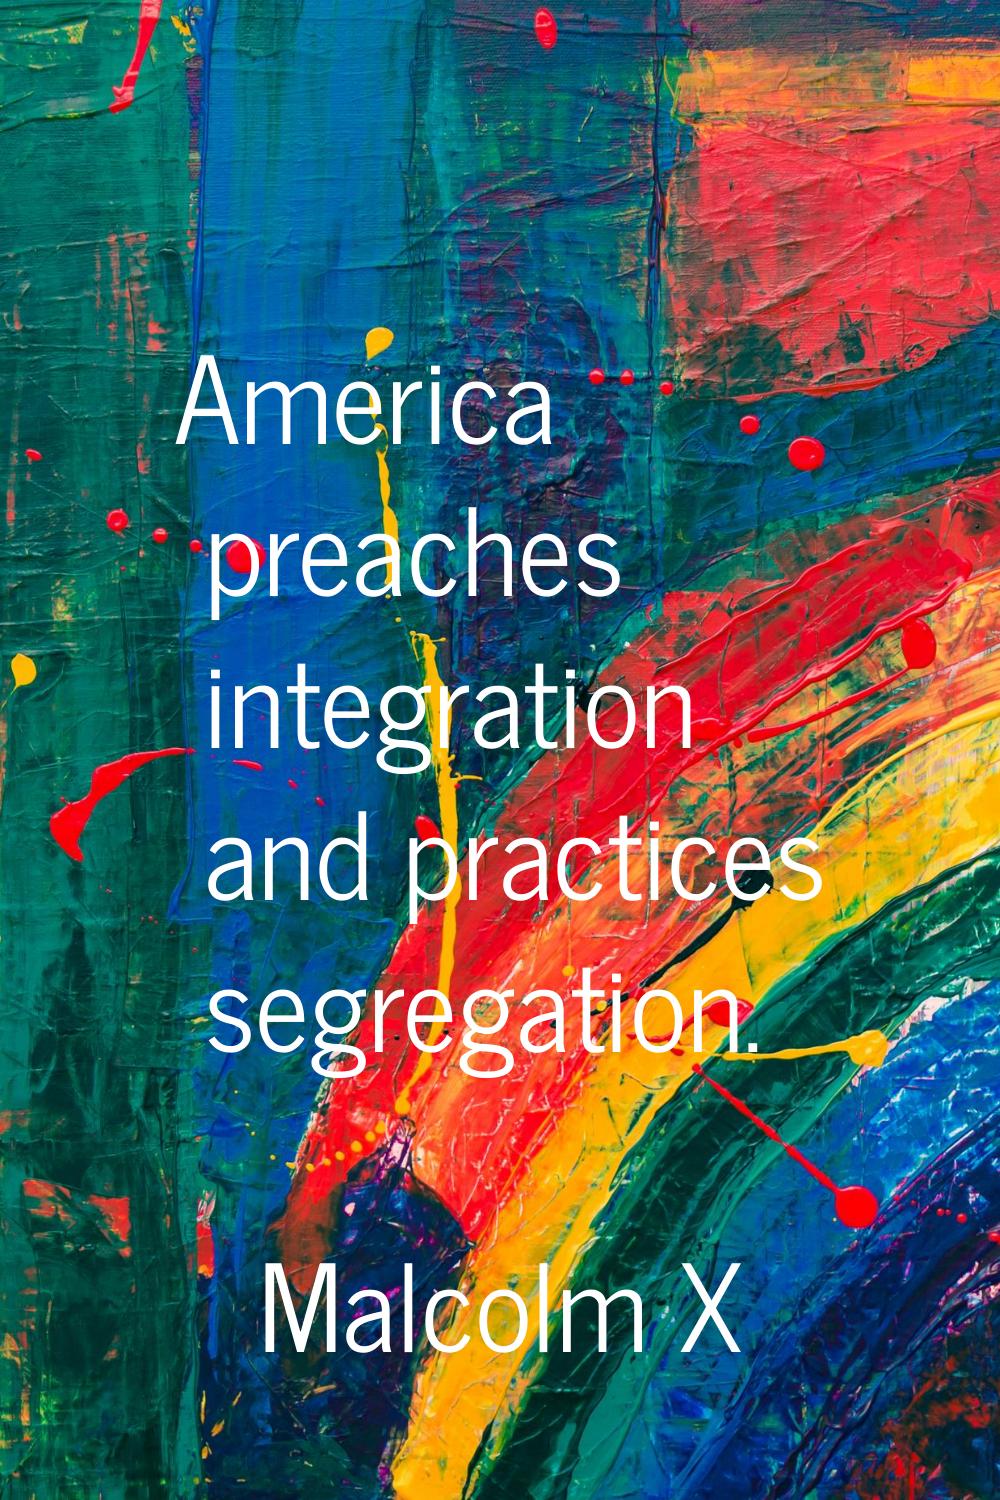 America preaches integration and practices segregation.